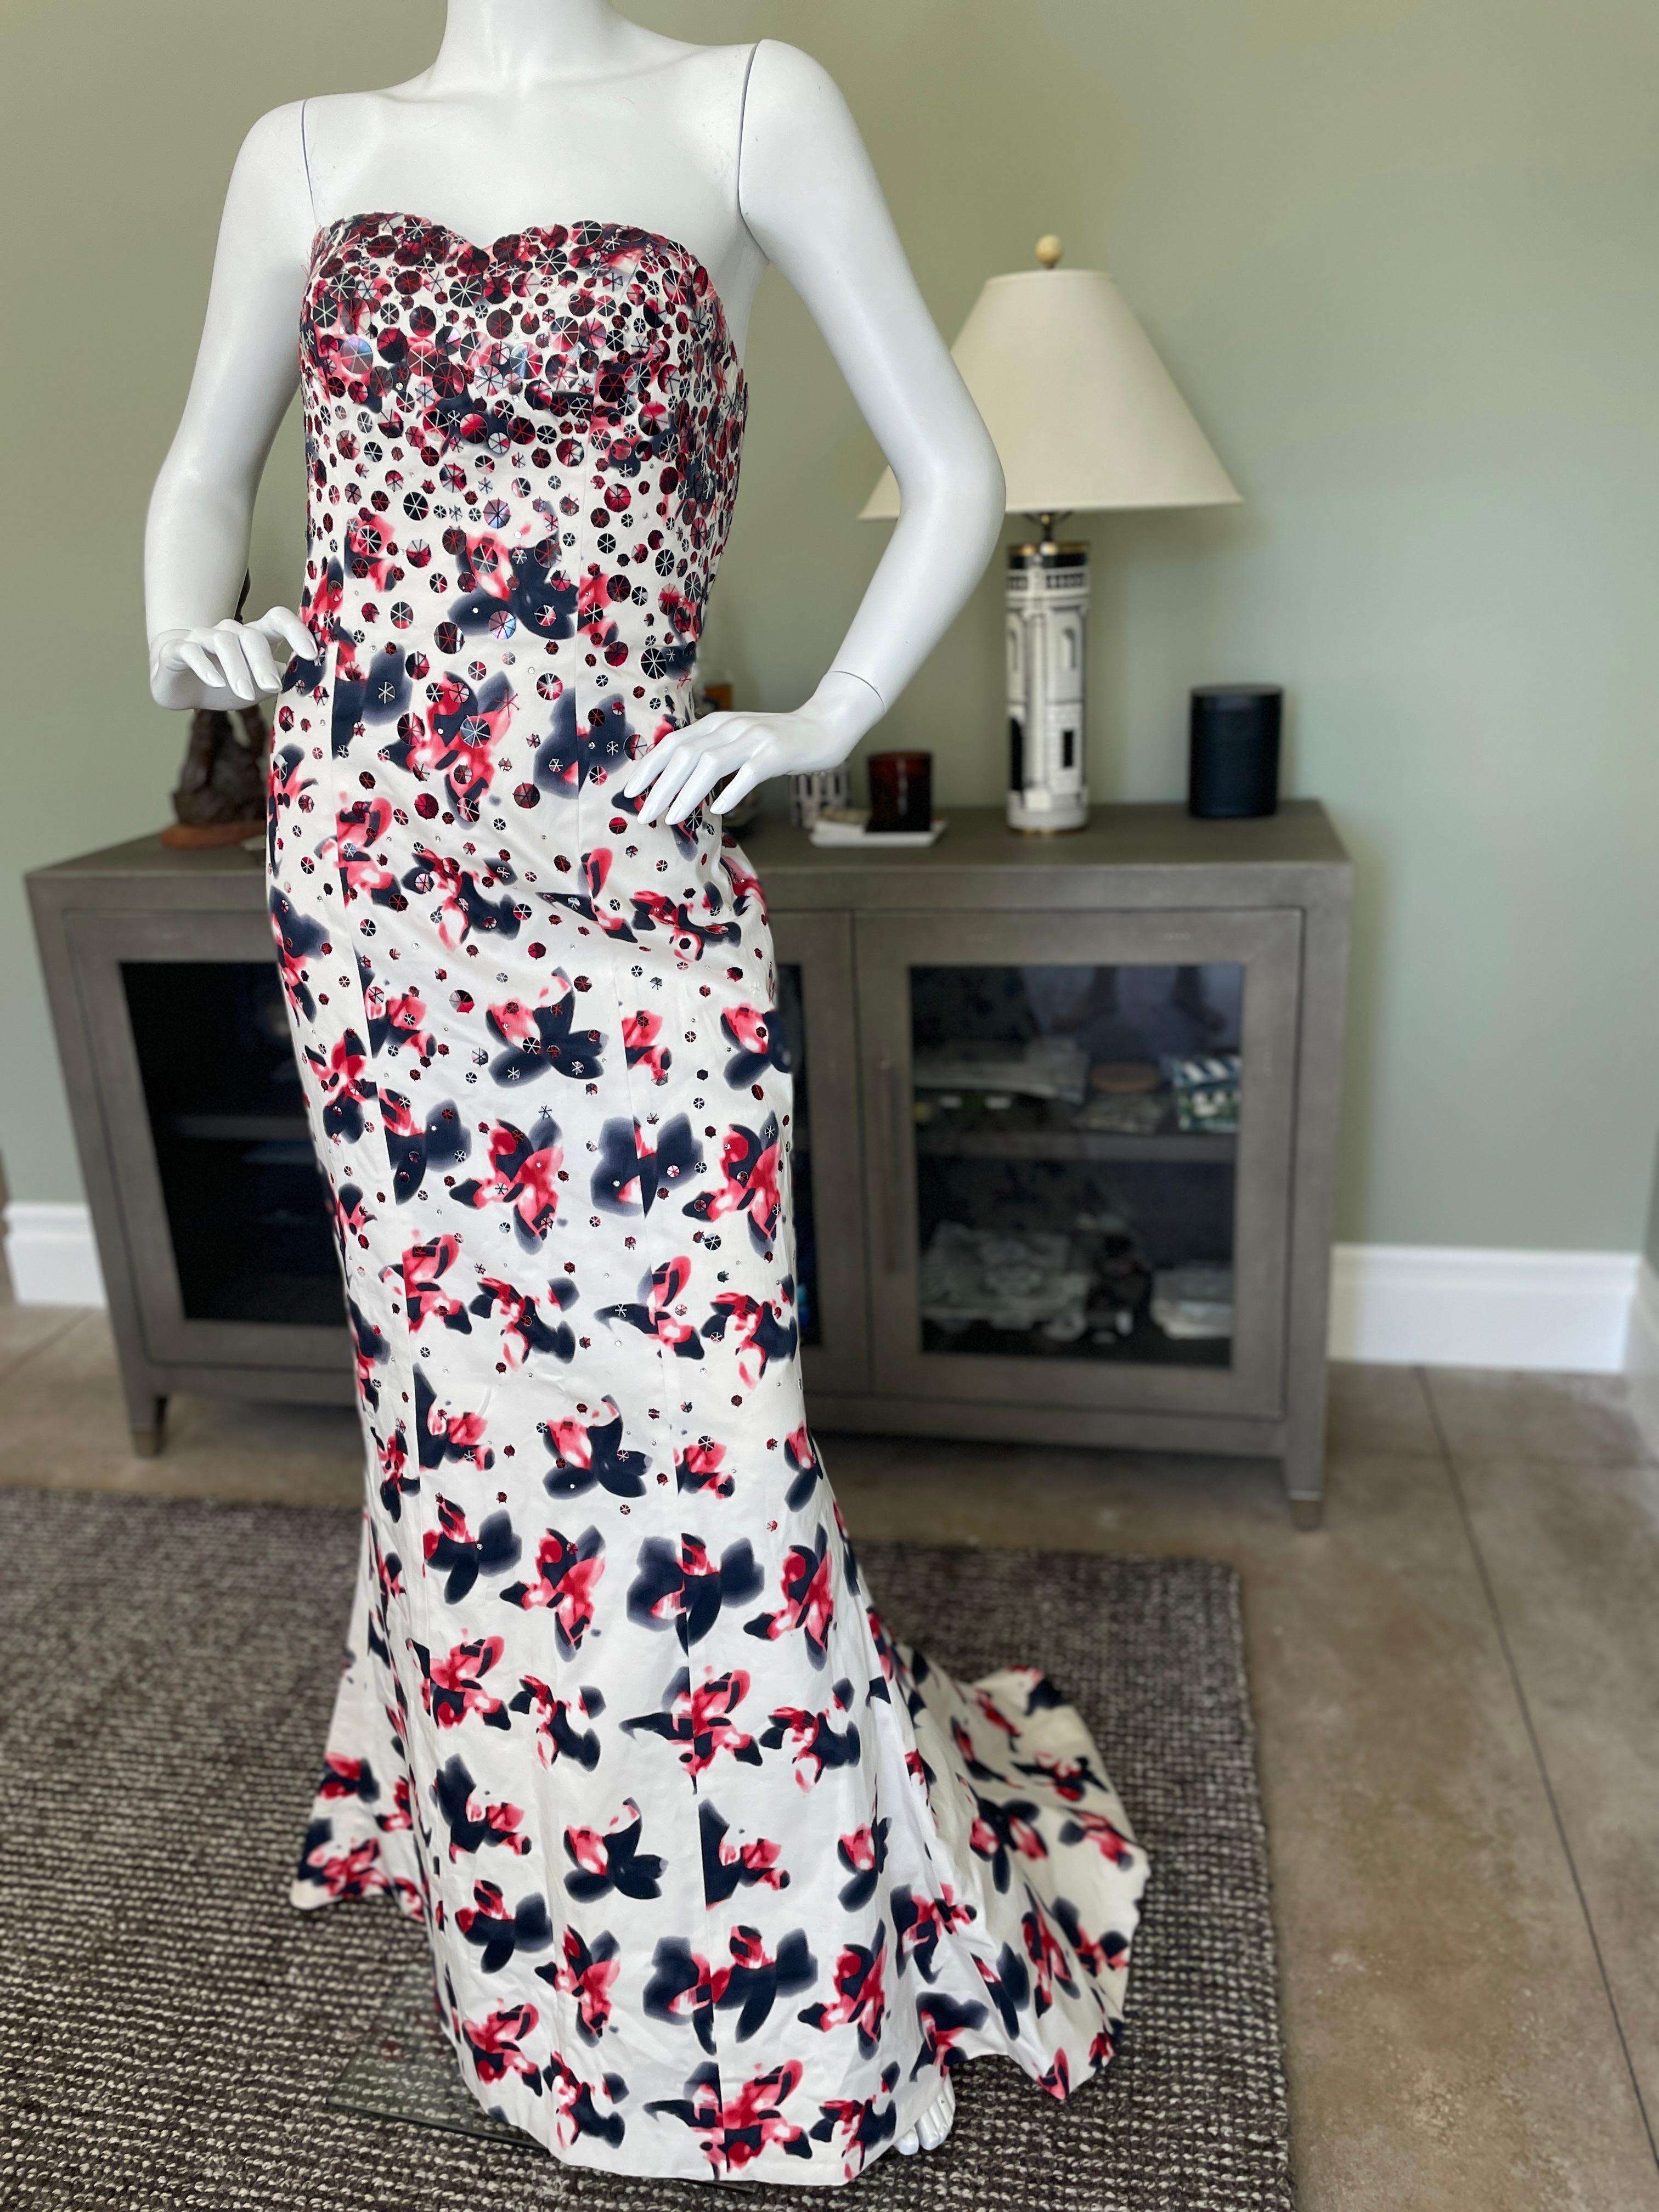 Carolina Herrera Vintage Strapless Floral Embellished Mermaid Dress with full train.
Feels like a fine cotton, it is quite lightweight, and has a full inner corset.
There is a wonderful full train
Size 4
  Bust 32